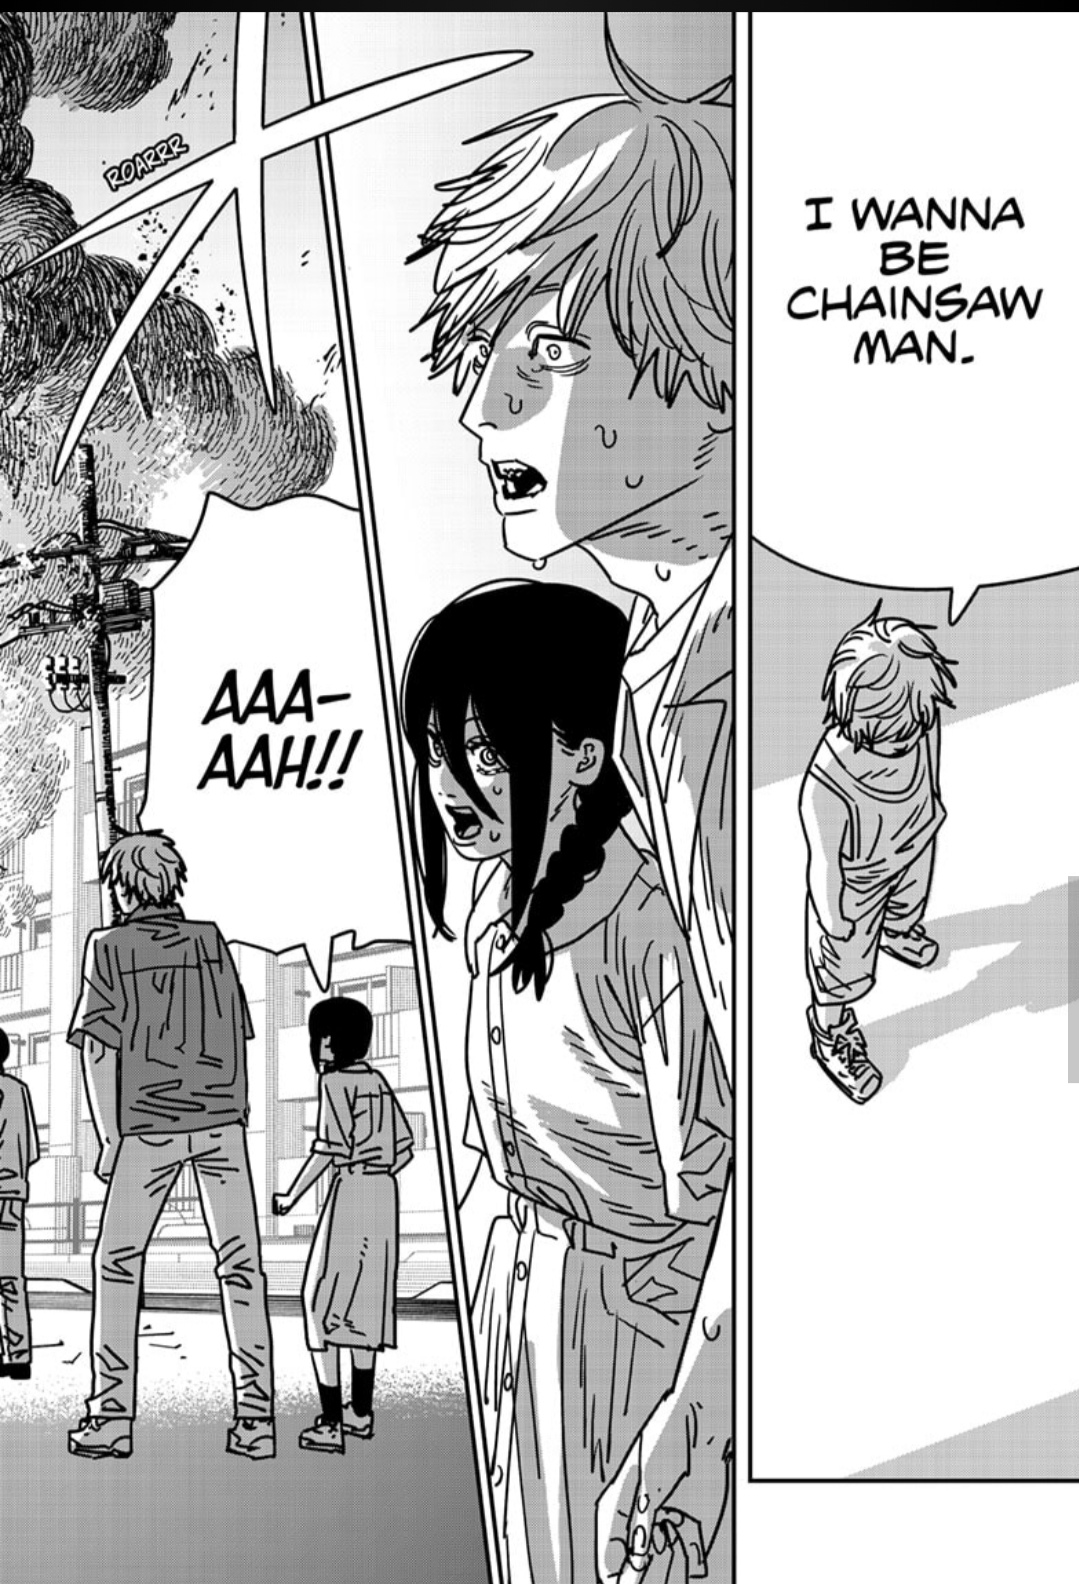 When Is Chainsaw Man Chapter 150 Coming? - IMDb